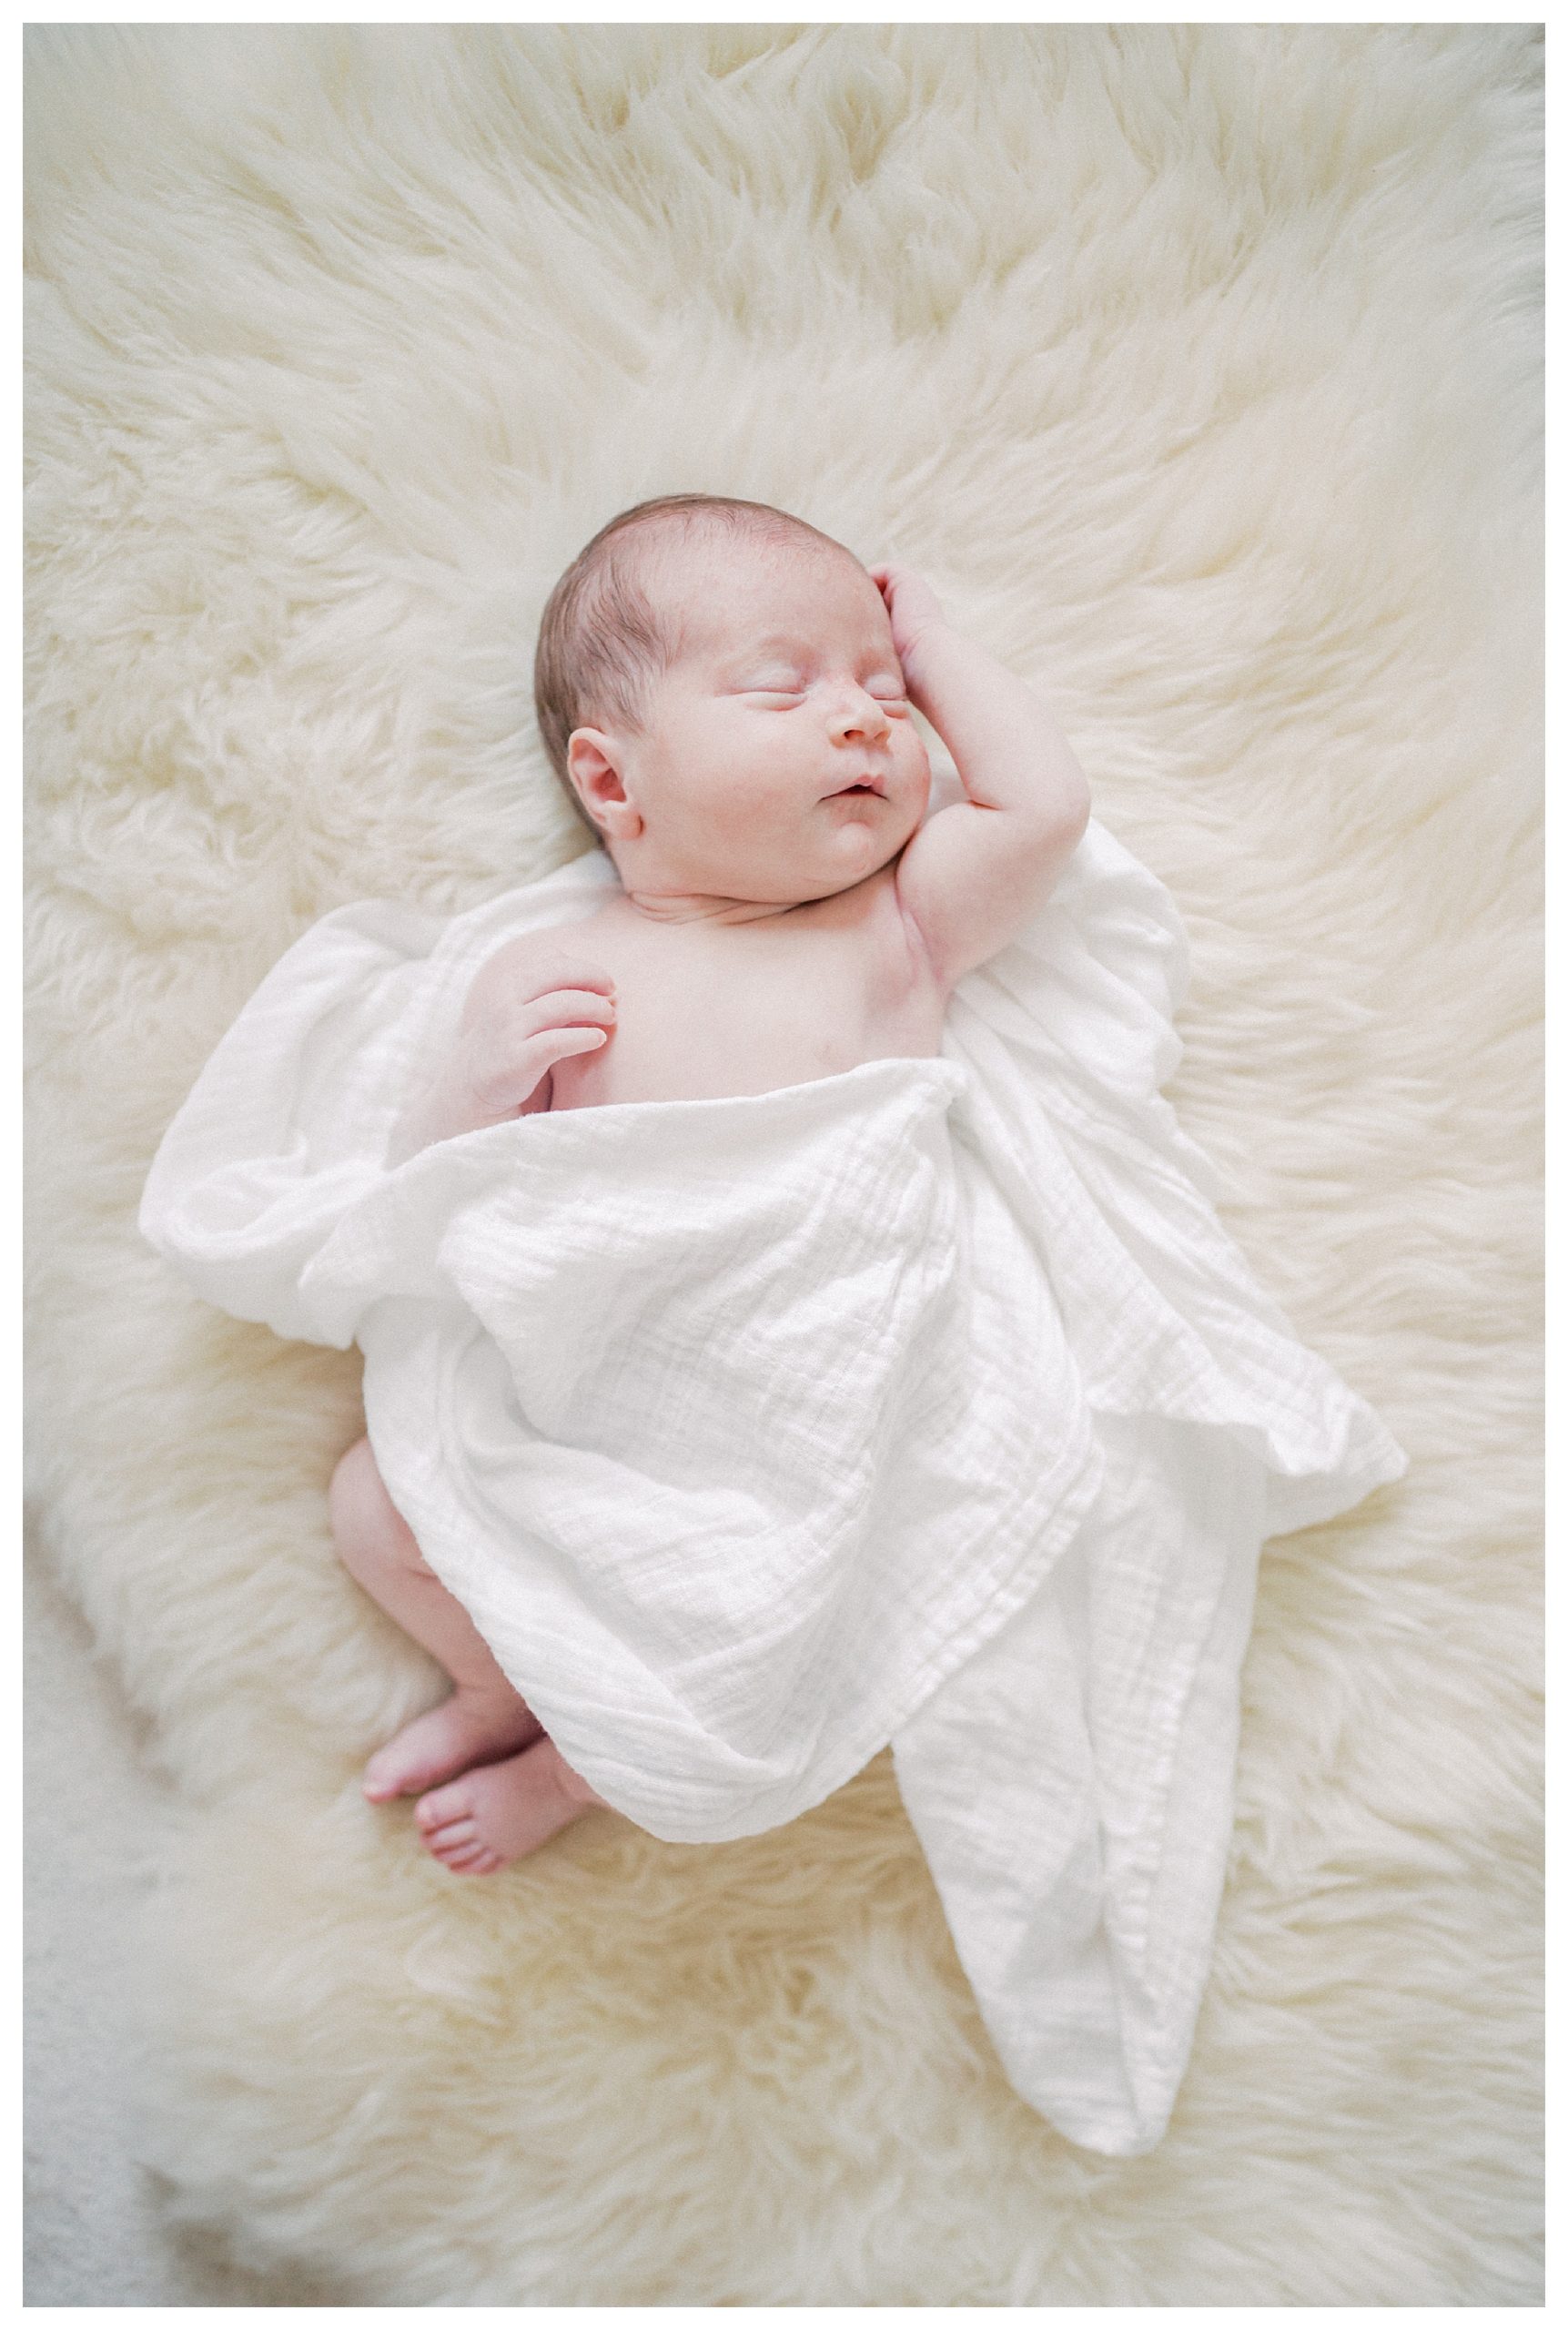 Newborn baby loosely swaddled in white peacefully sleeps on carpet during in-home newborn session.